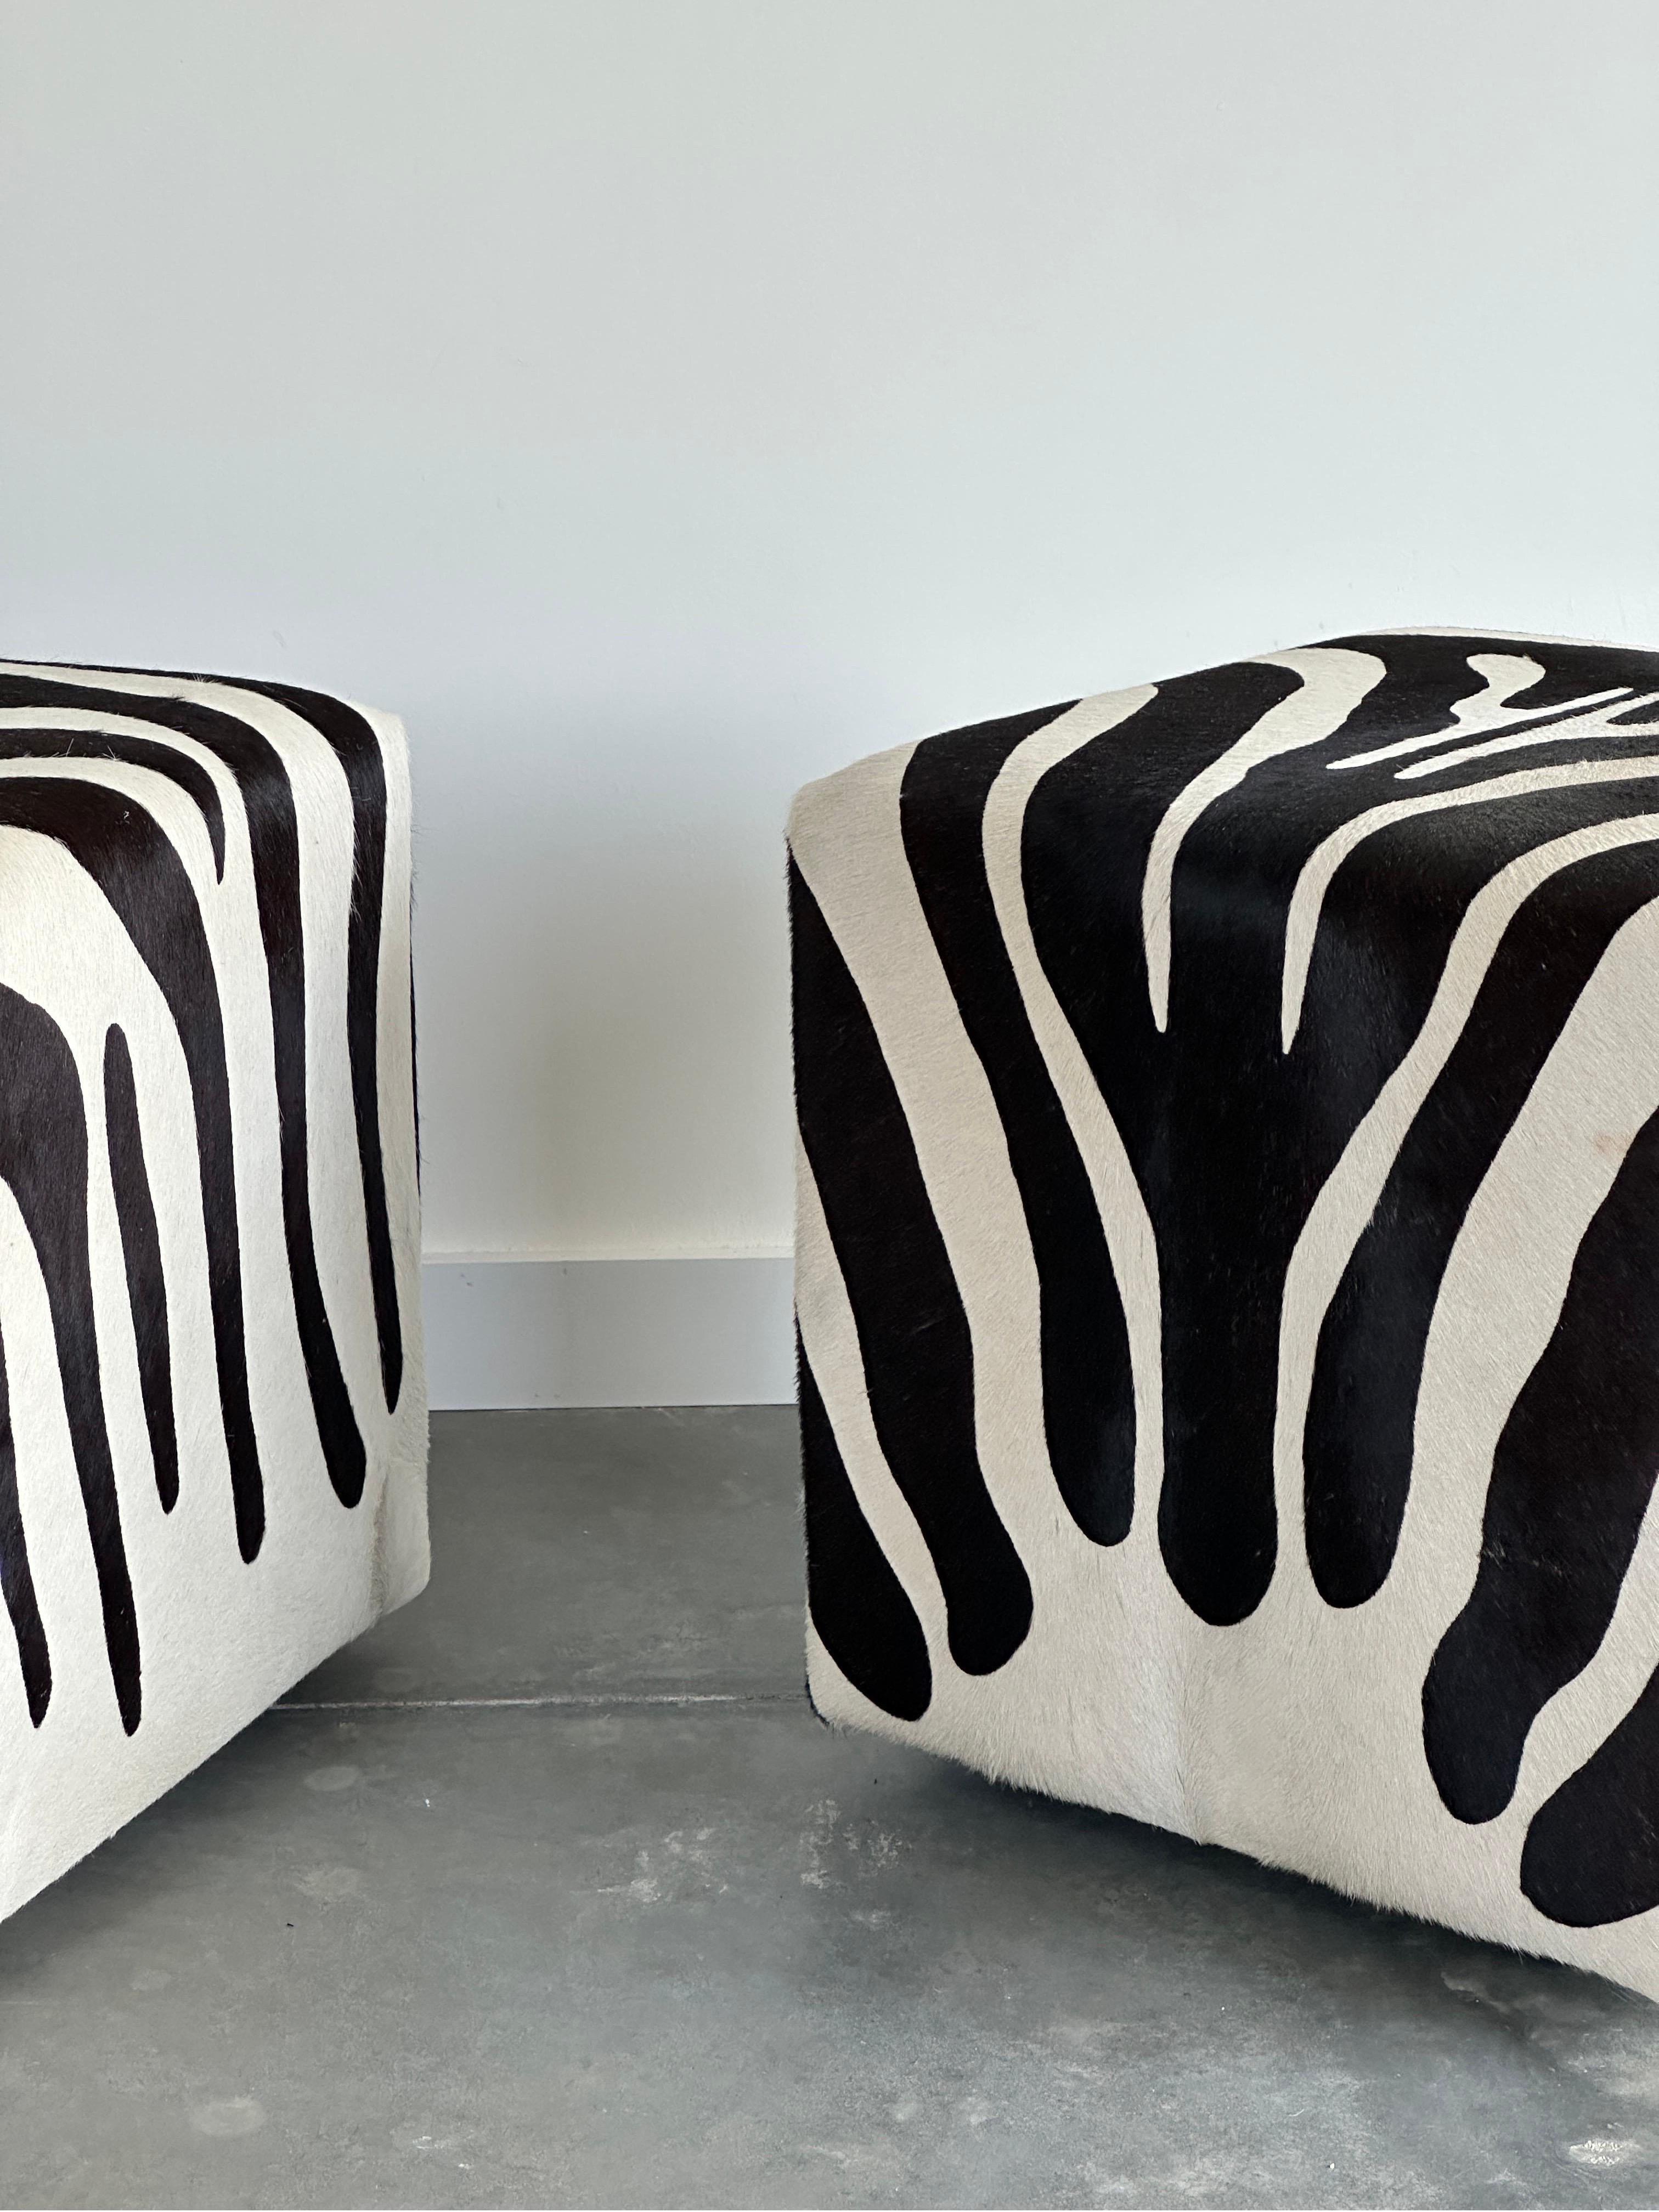 Zebra Printed Pony Hair Cube Ottoman In Excellent Condition For Sale In Kleinburg, ON